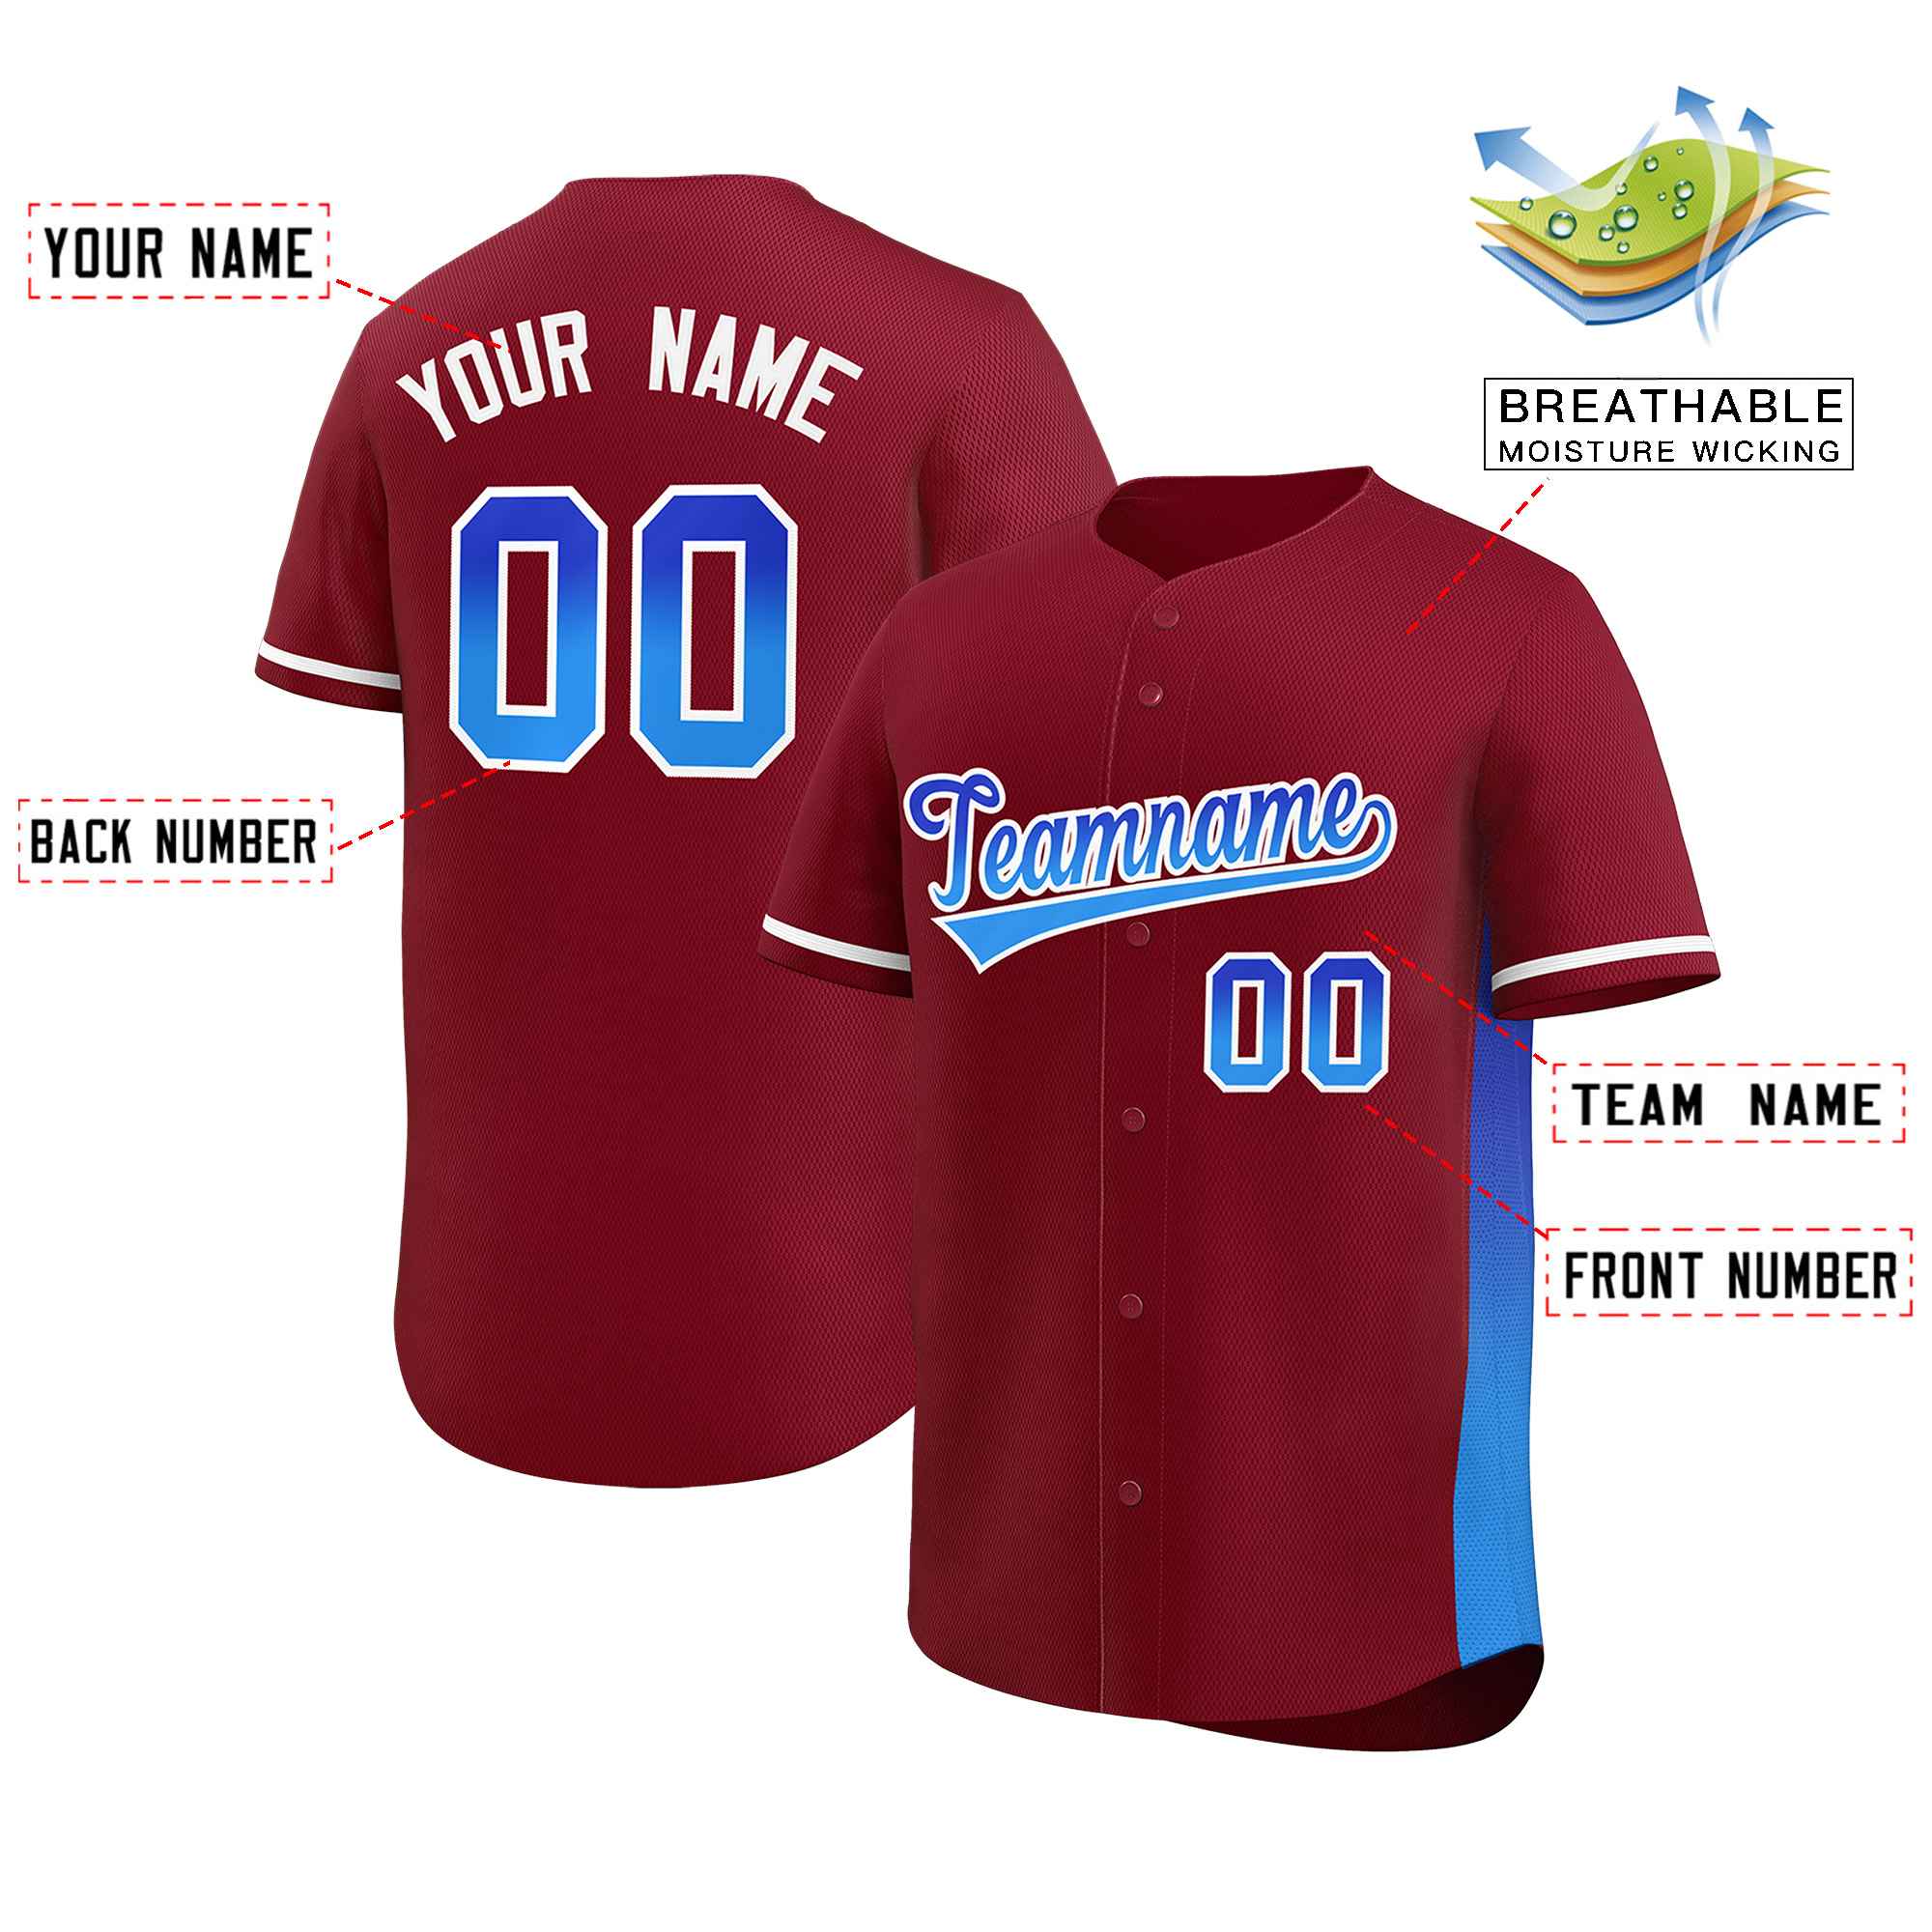 Custom Crimson Royal-Powder Blue Personalized Gradient Font And Side Design Authentic Baseball Jersey